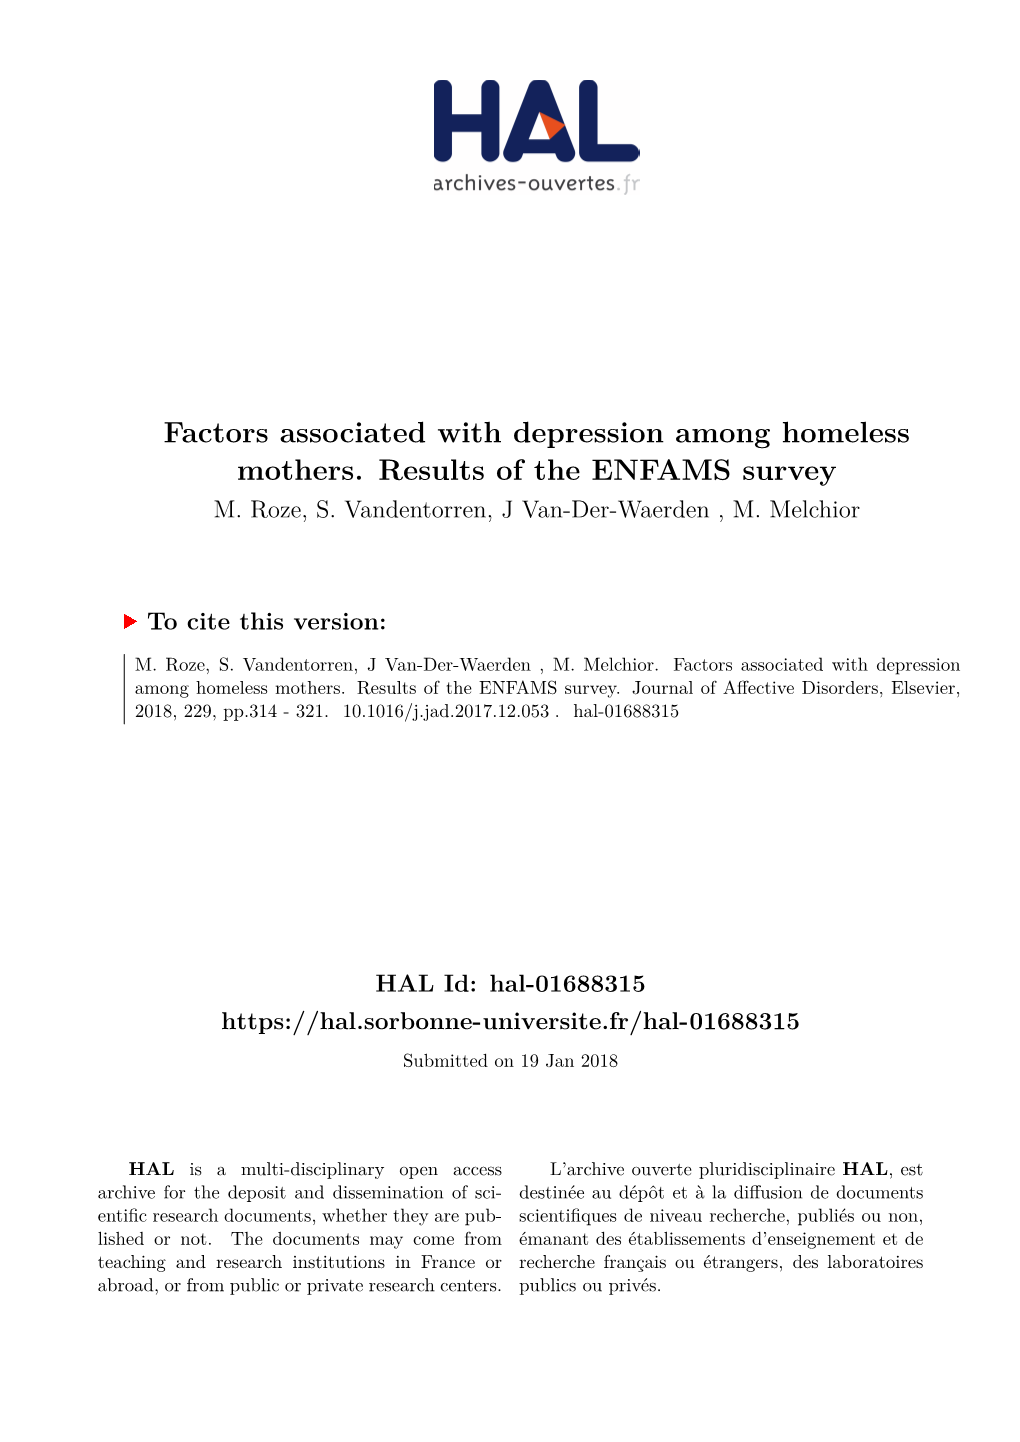 Factors Associated with Depression Among Homeless Mothers. Results of the ENFAMS Survey M